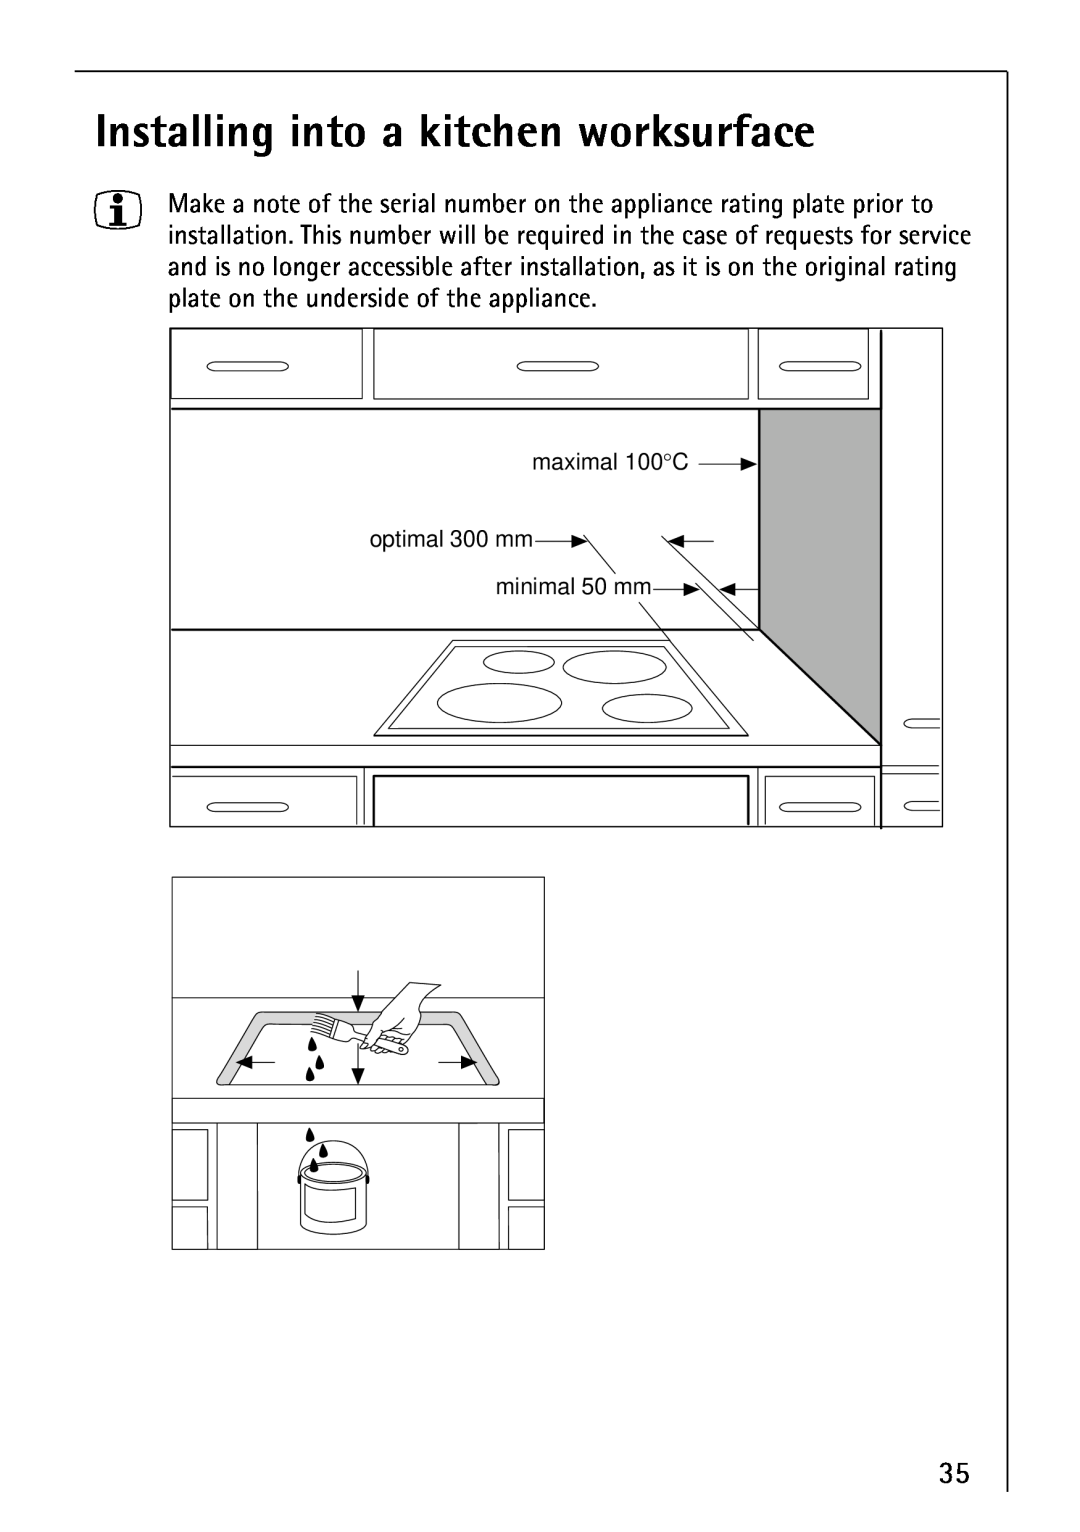 Electrolux 66300KF-an Installing into a kitchen worksurface, optimal 300 mm, minimal 50 mm, maximal 100 C 